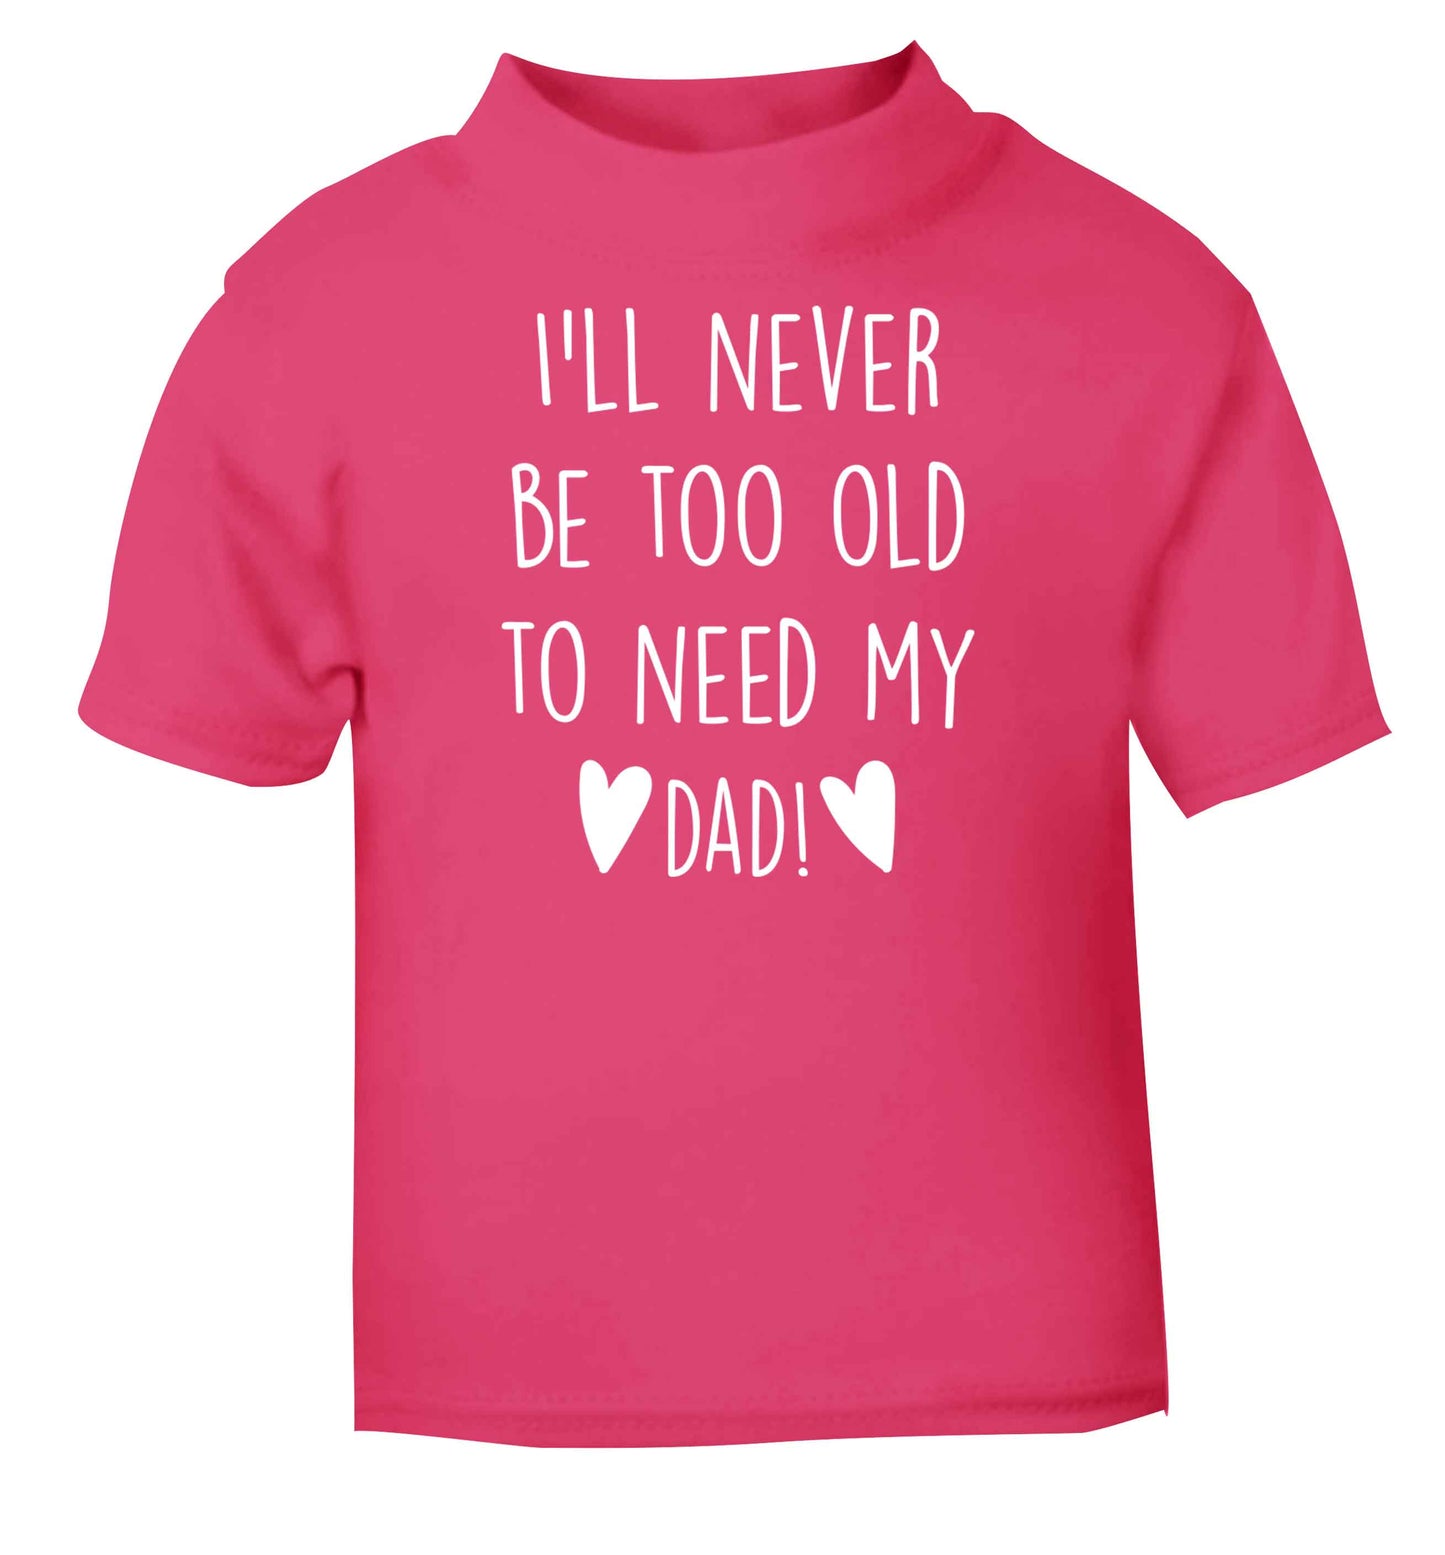 I'll never be too old to need my dad pink baby toddler Tshirt 2 Years